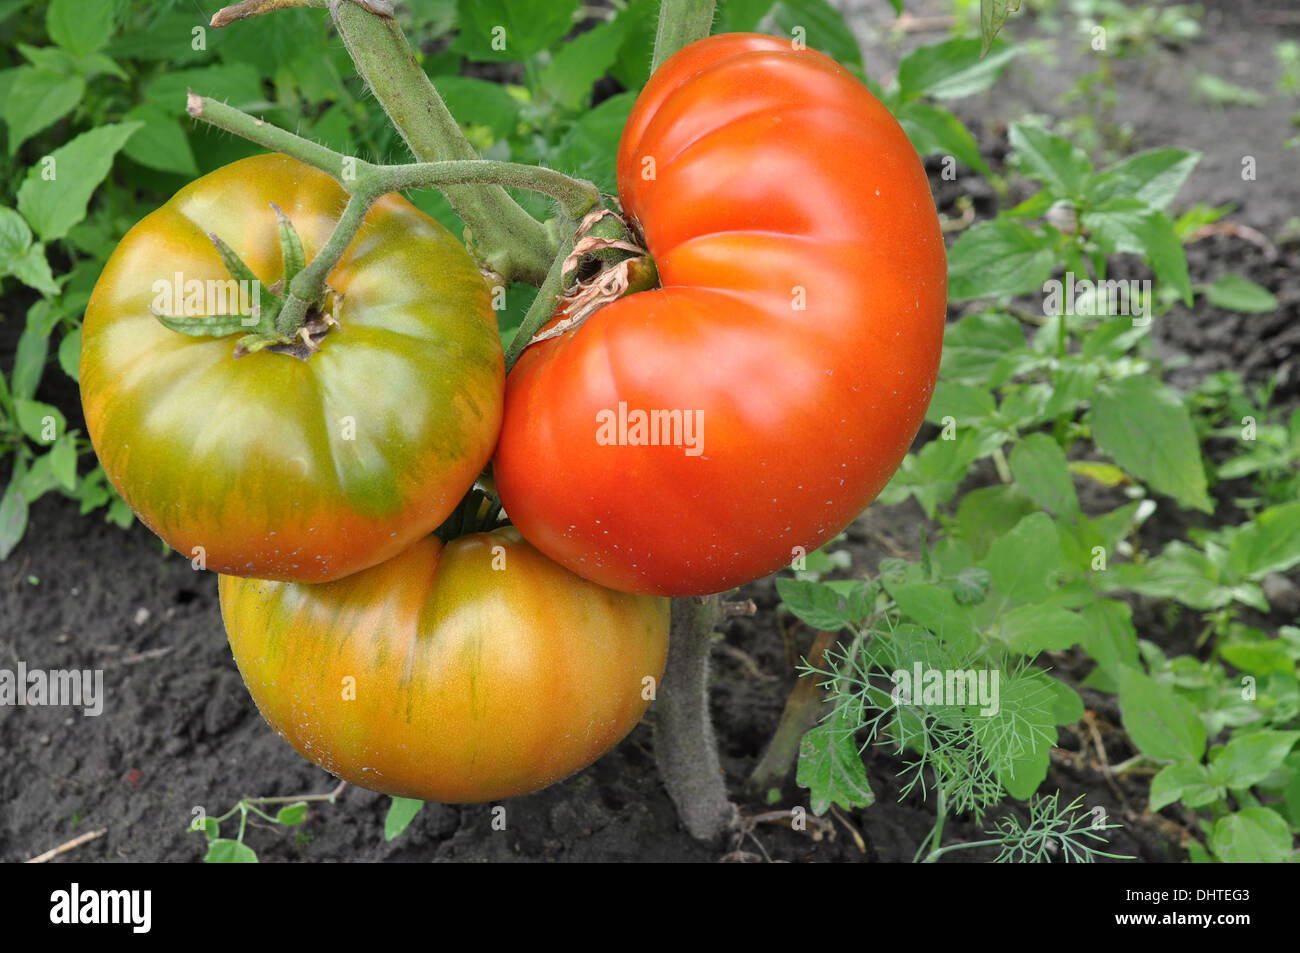 Three big tomatoes growing on a branch Stock Photo